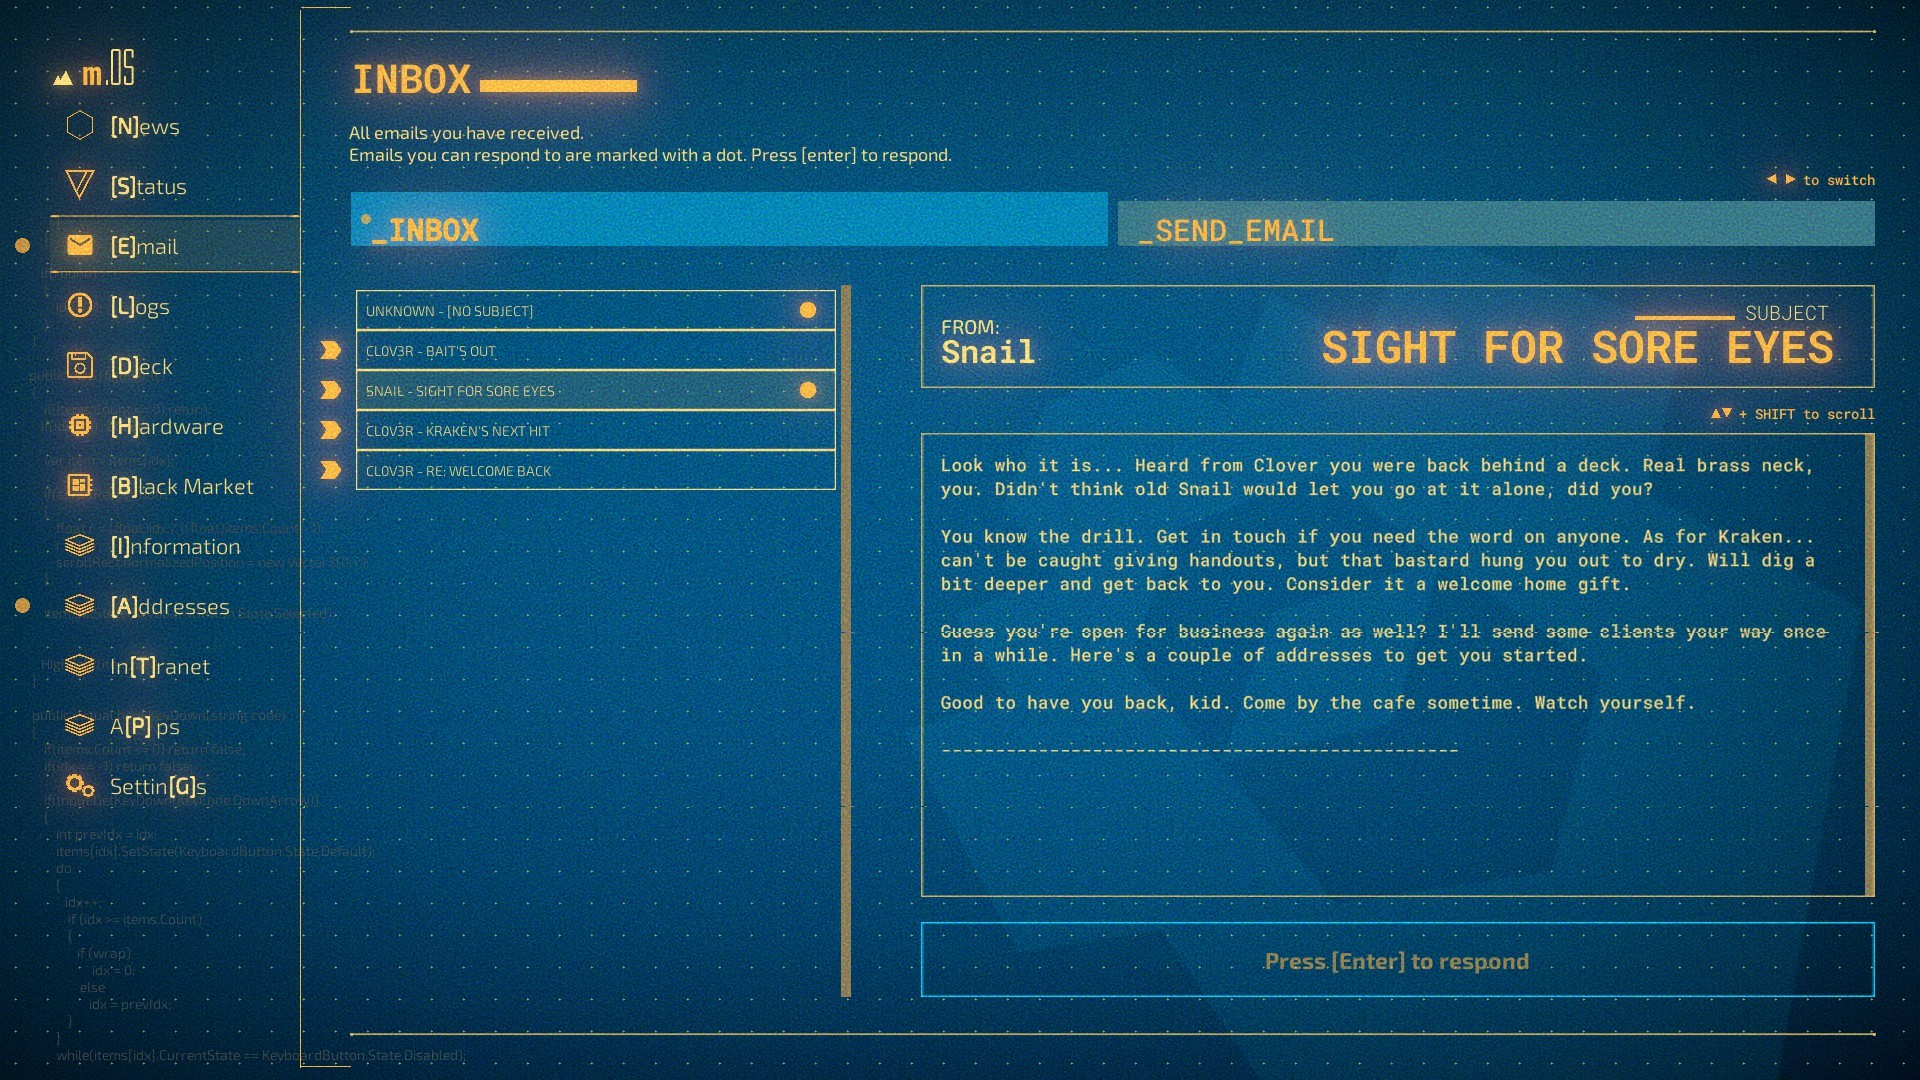 Midnight Protocol game review: Feel like a real hacker